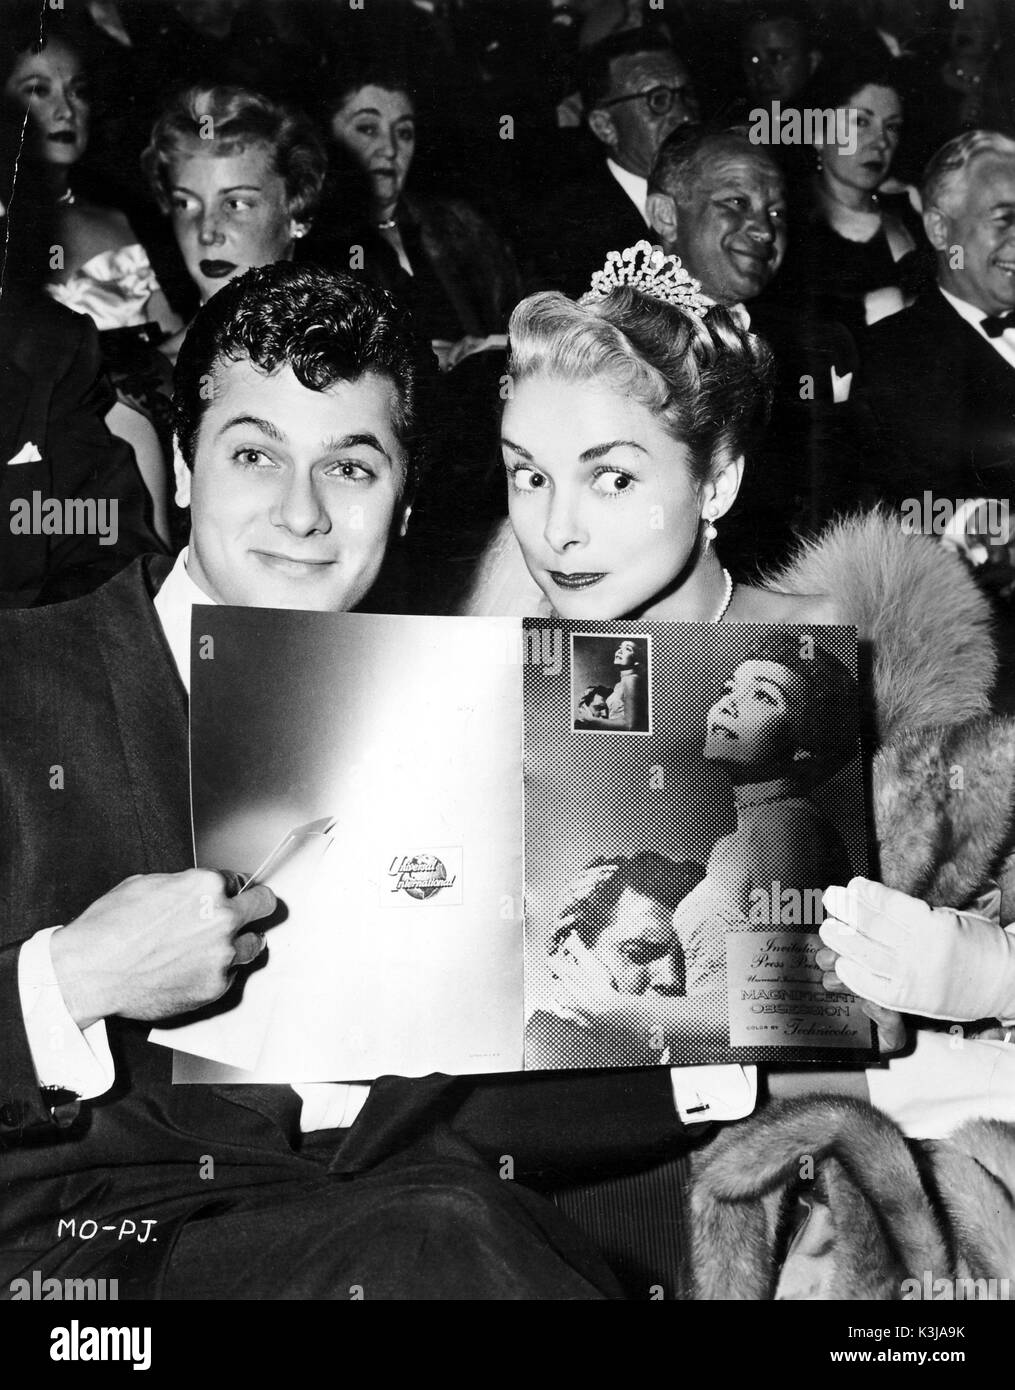 TONY CURTIS & JANET LEIGH Married 1951 - 1962 at the premiere of Magnificent Obsession, 1954 TONY CURTIS & JANET LEIGH Married 1951 - 1962 at the premiere of Magnificent Obsession, 1954 Stock Photo